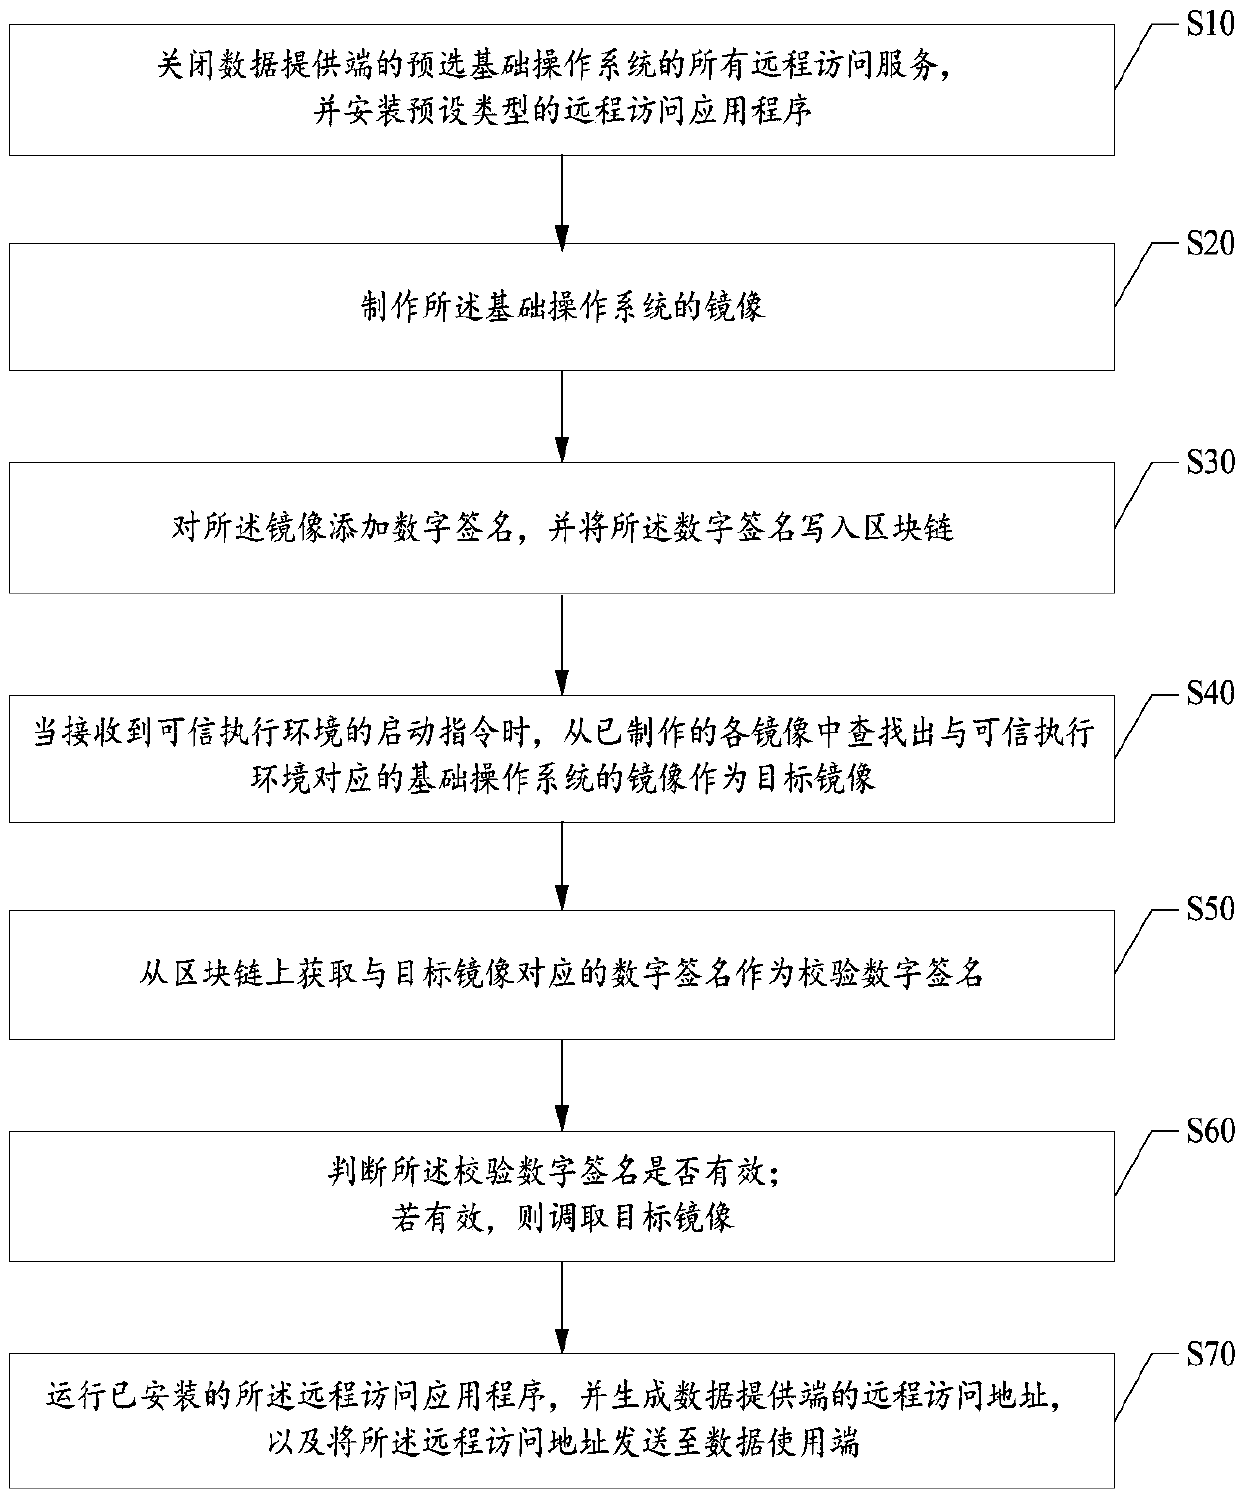 Trusted execution environment implementation method and device, terminal device and readable storage medium